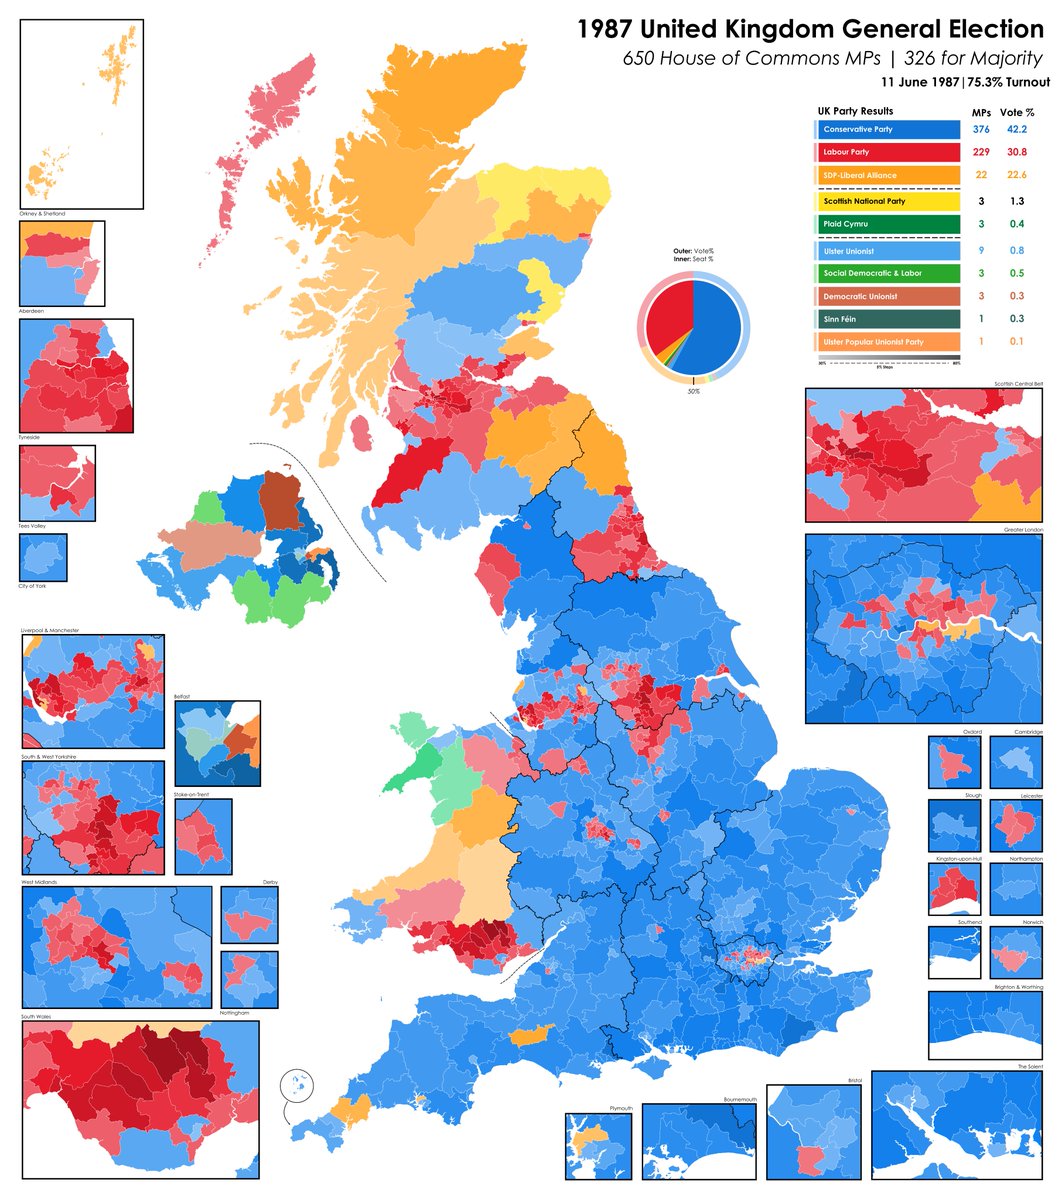 Good morning! This is a map of the 1987 United Kingdom General Election. Margret Thatcher led the Conservative Party to a third consecutive general election victory. Neil Kinnock's Labour made small gains, mostly in the Scottish central belt and Welsh valleys.